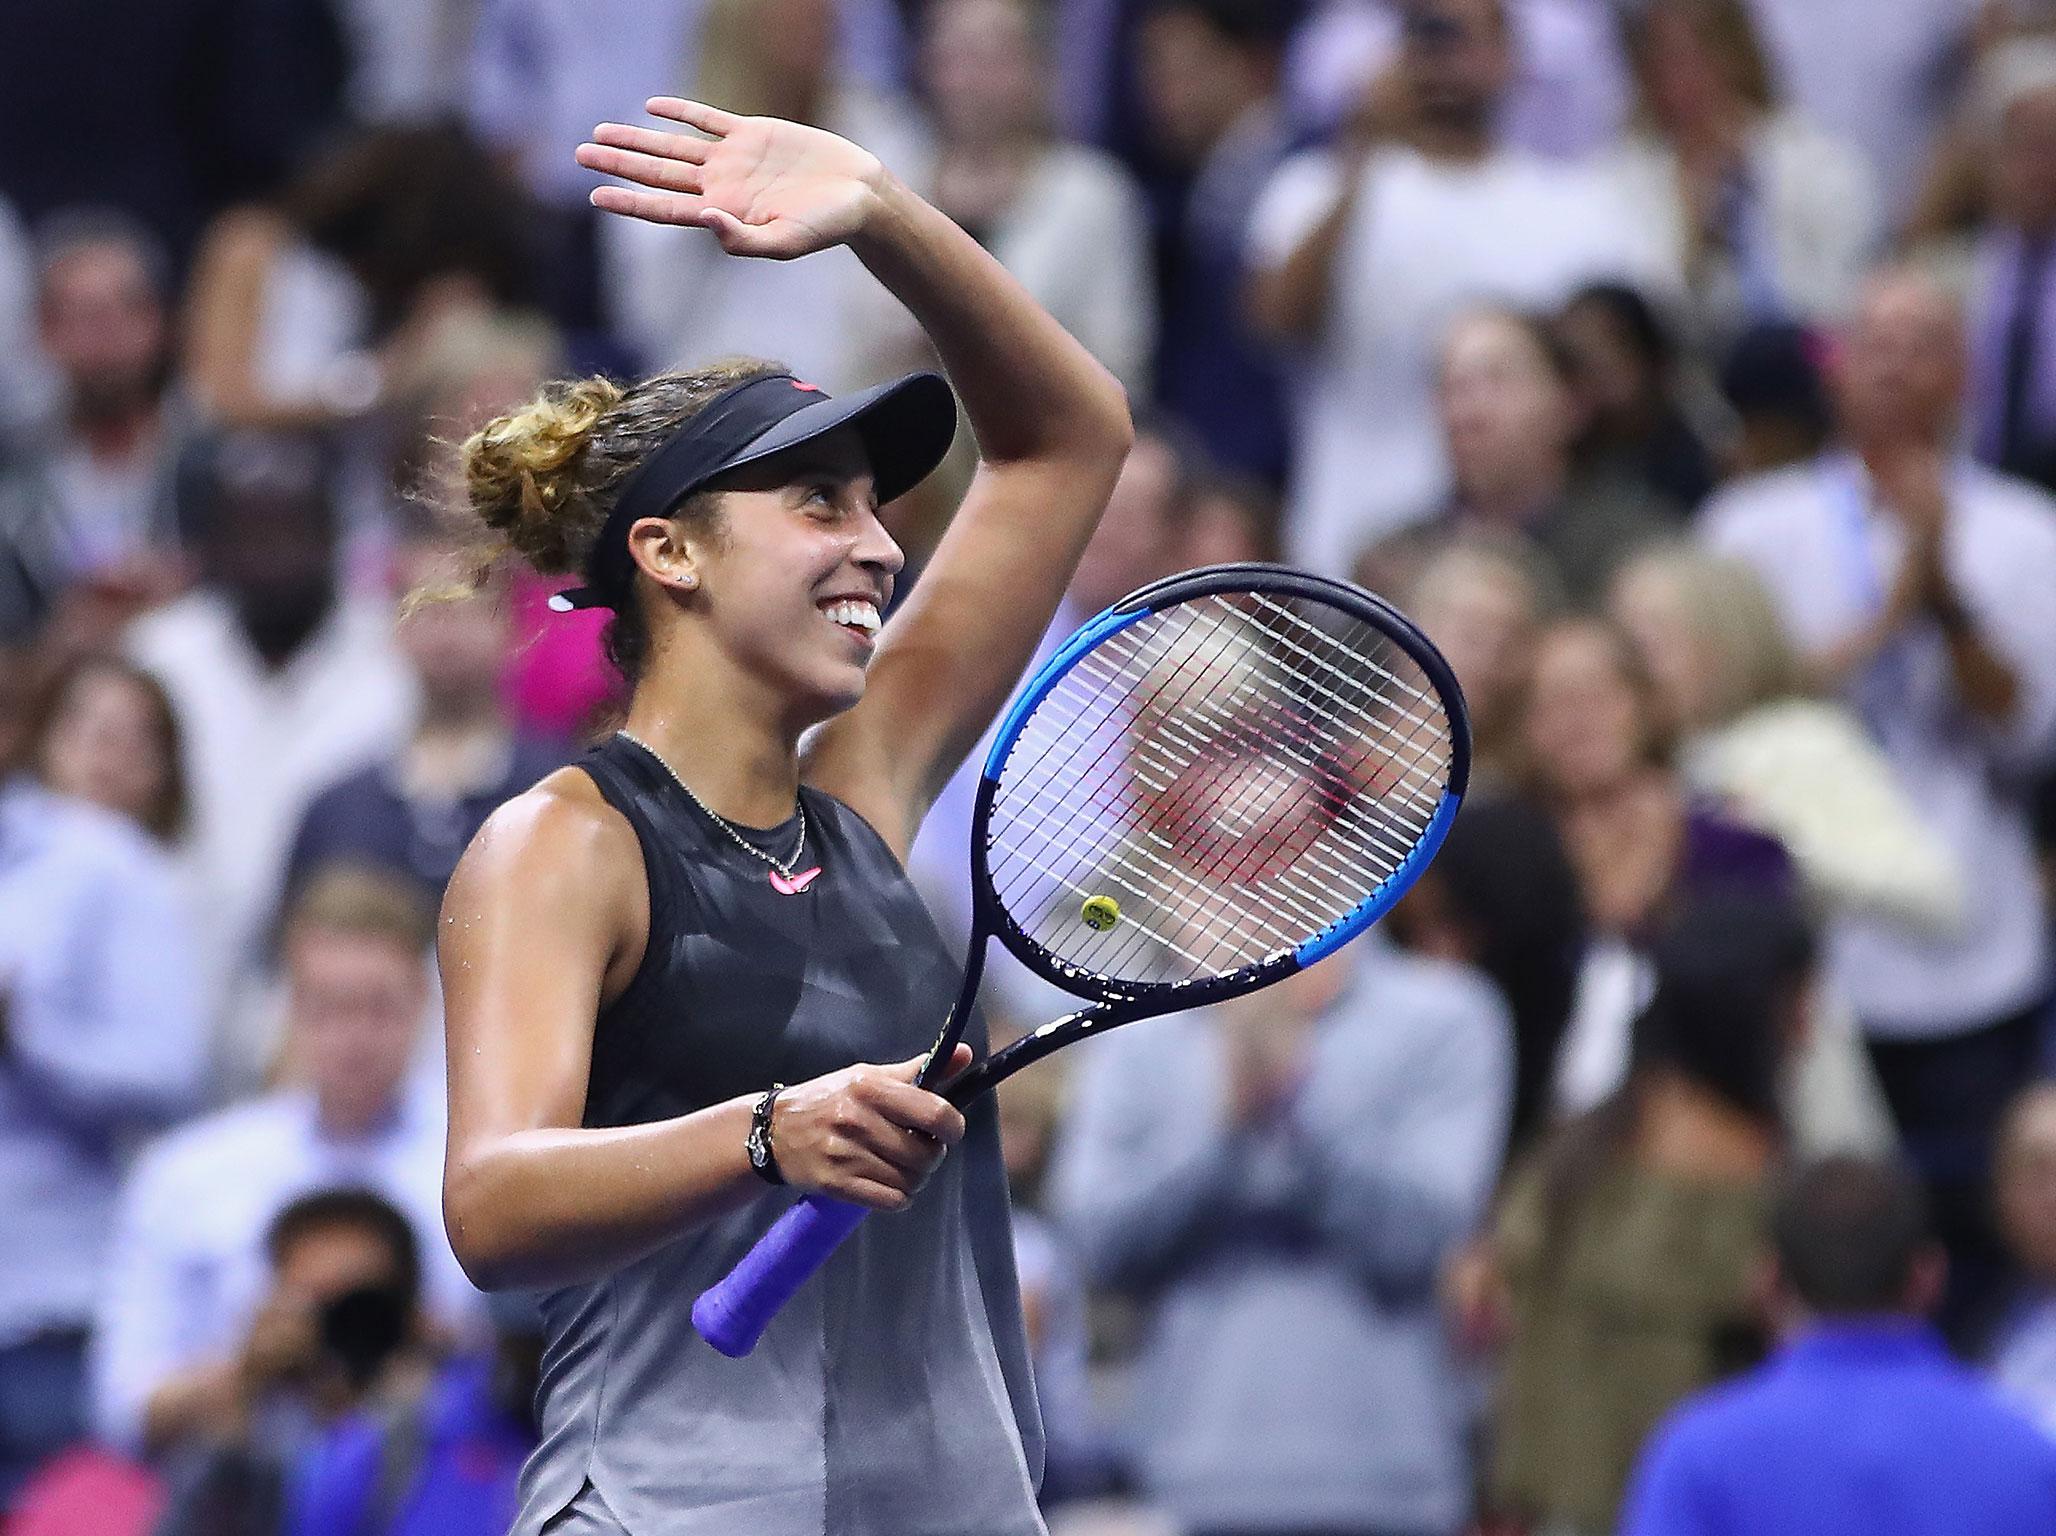 Madison Keys wins to make it four American women in US Open semifinals